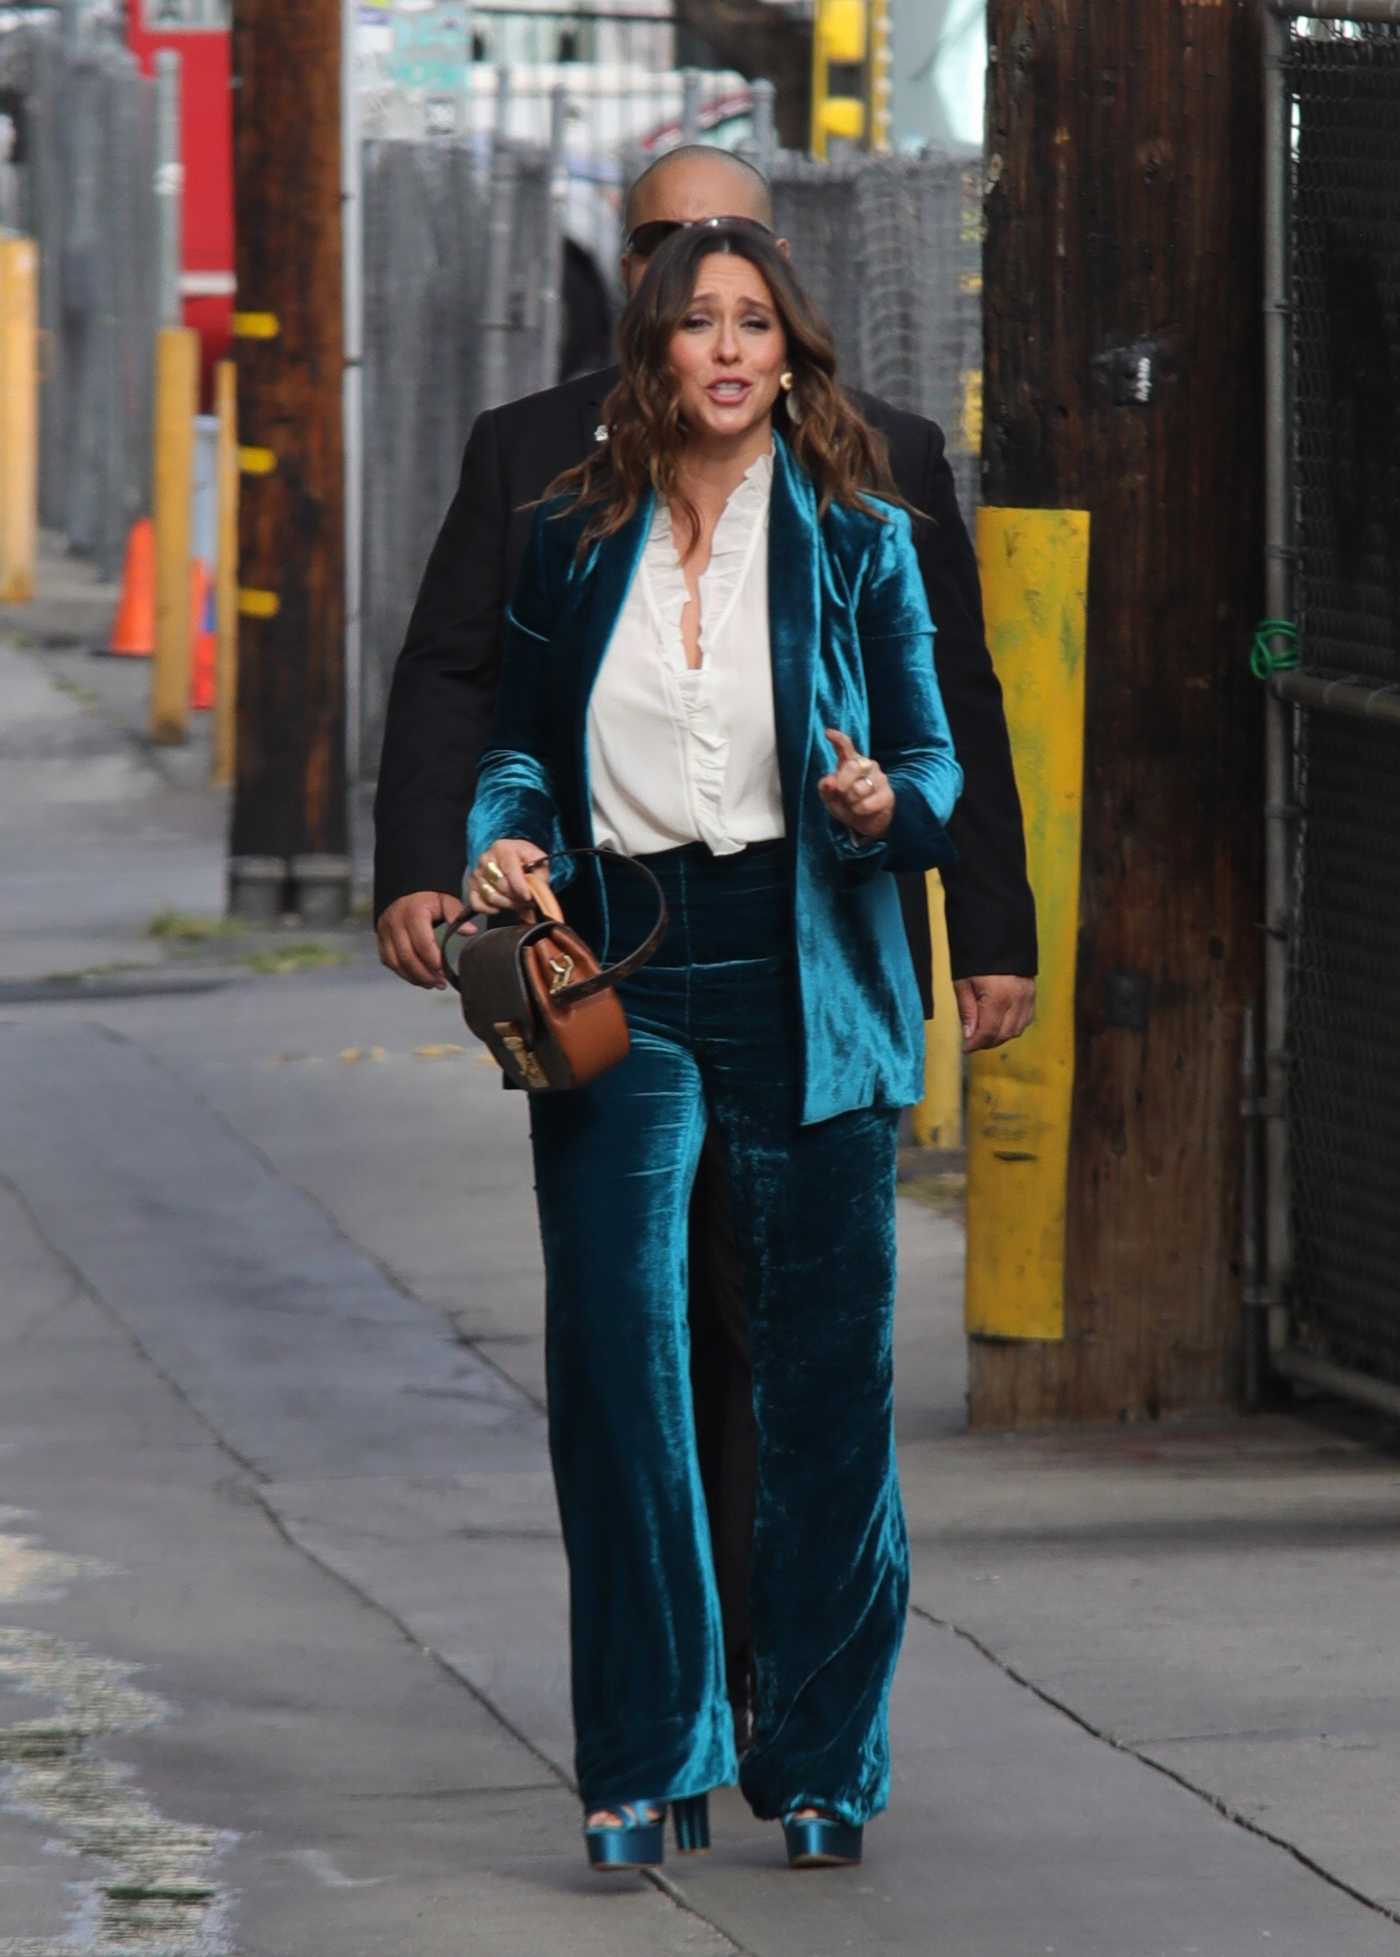 Jennifer Love Hewitt in a Turquoise Suit Visits Jimmy Kimmel Live in Hollywood 09/04/2018